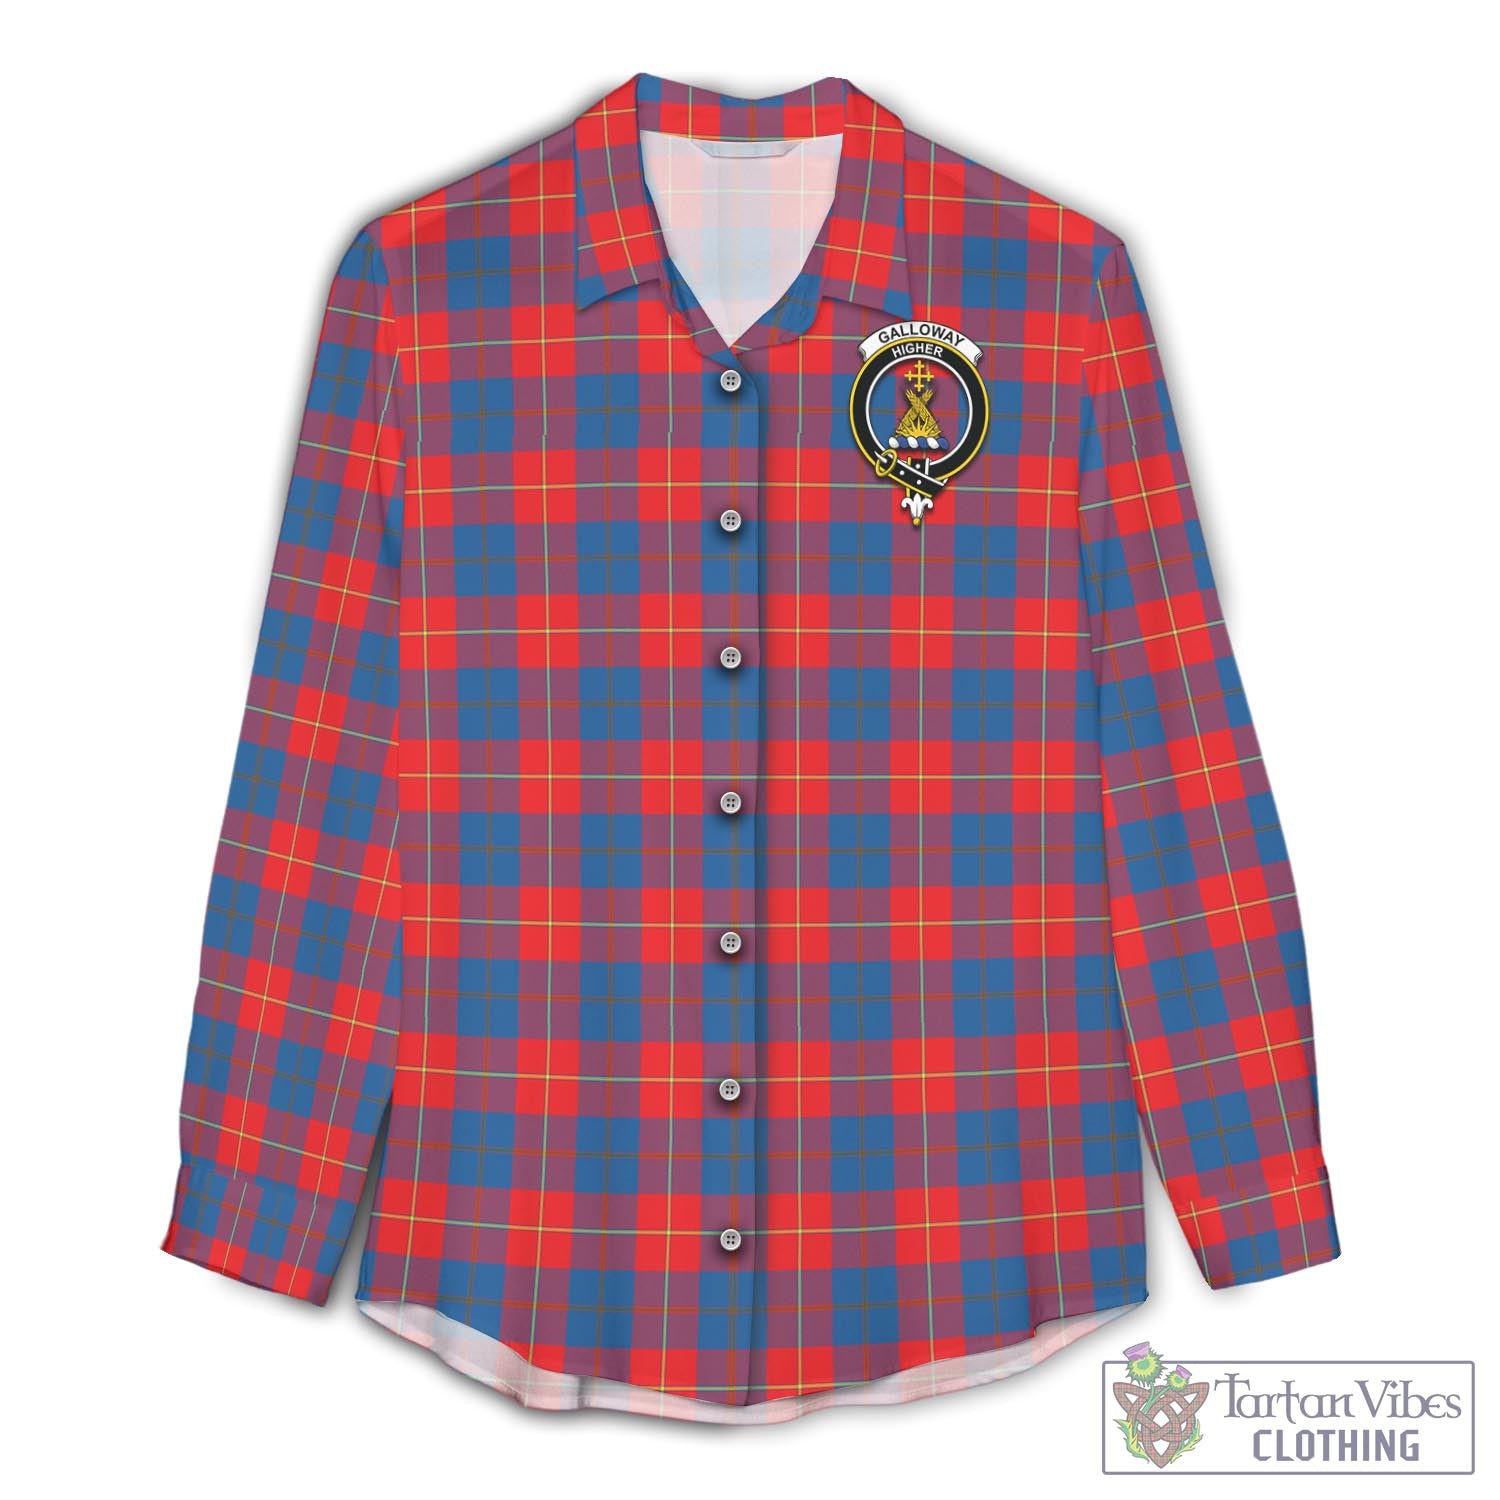 Tartan Vibes Clothing Galloway Red Tartan Womens Casual Shirt with Family Crest